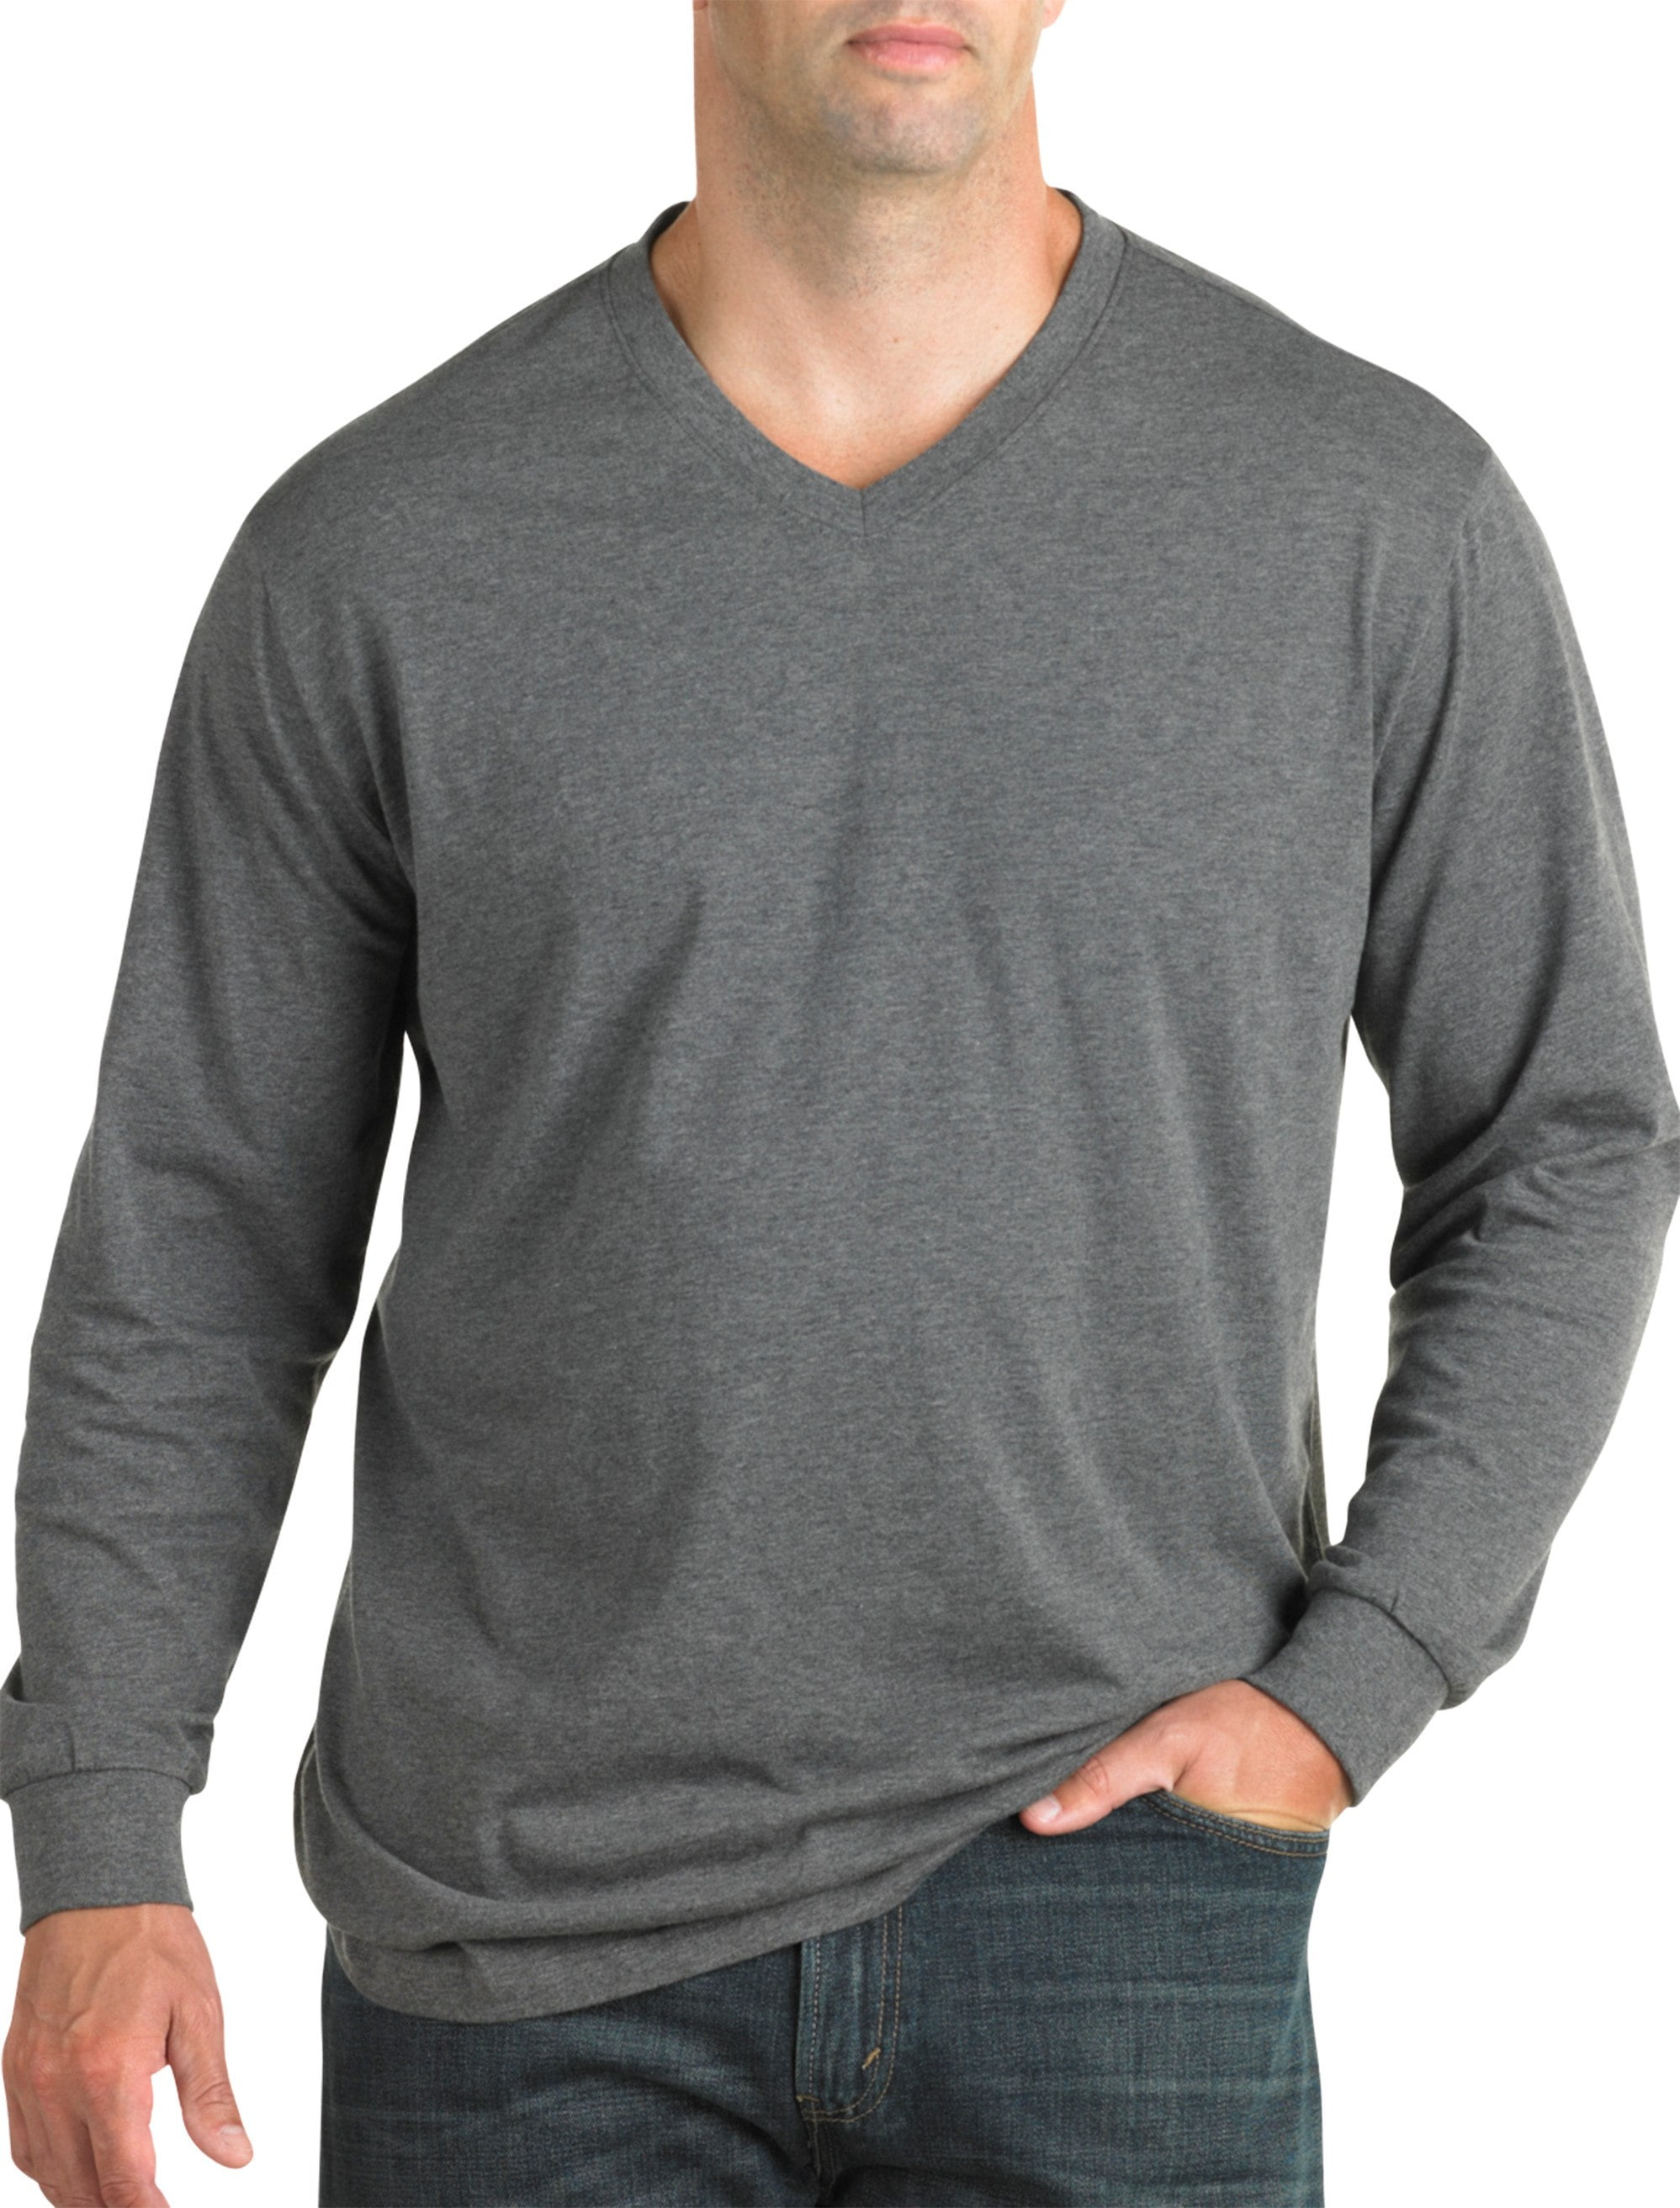 Harbor Bay by DXL Big and Tall Men's Wicking Jersey Long-Sleeve V-Neck ...